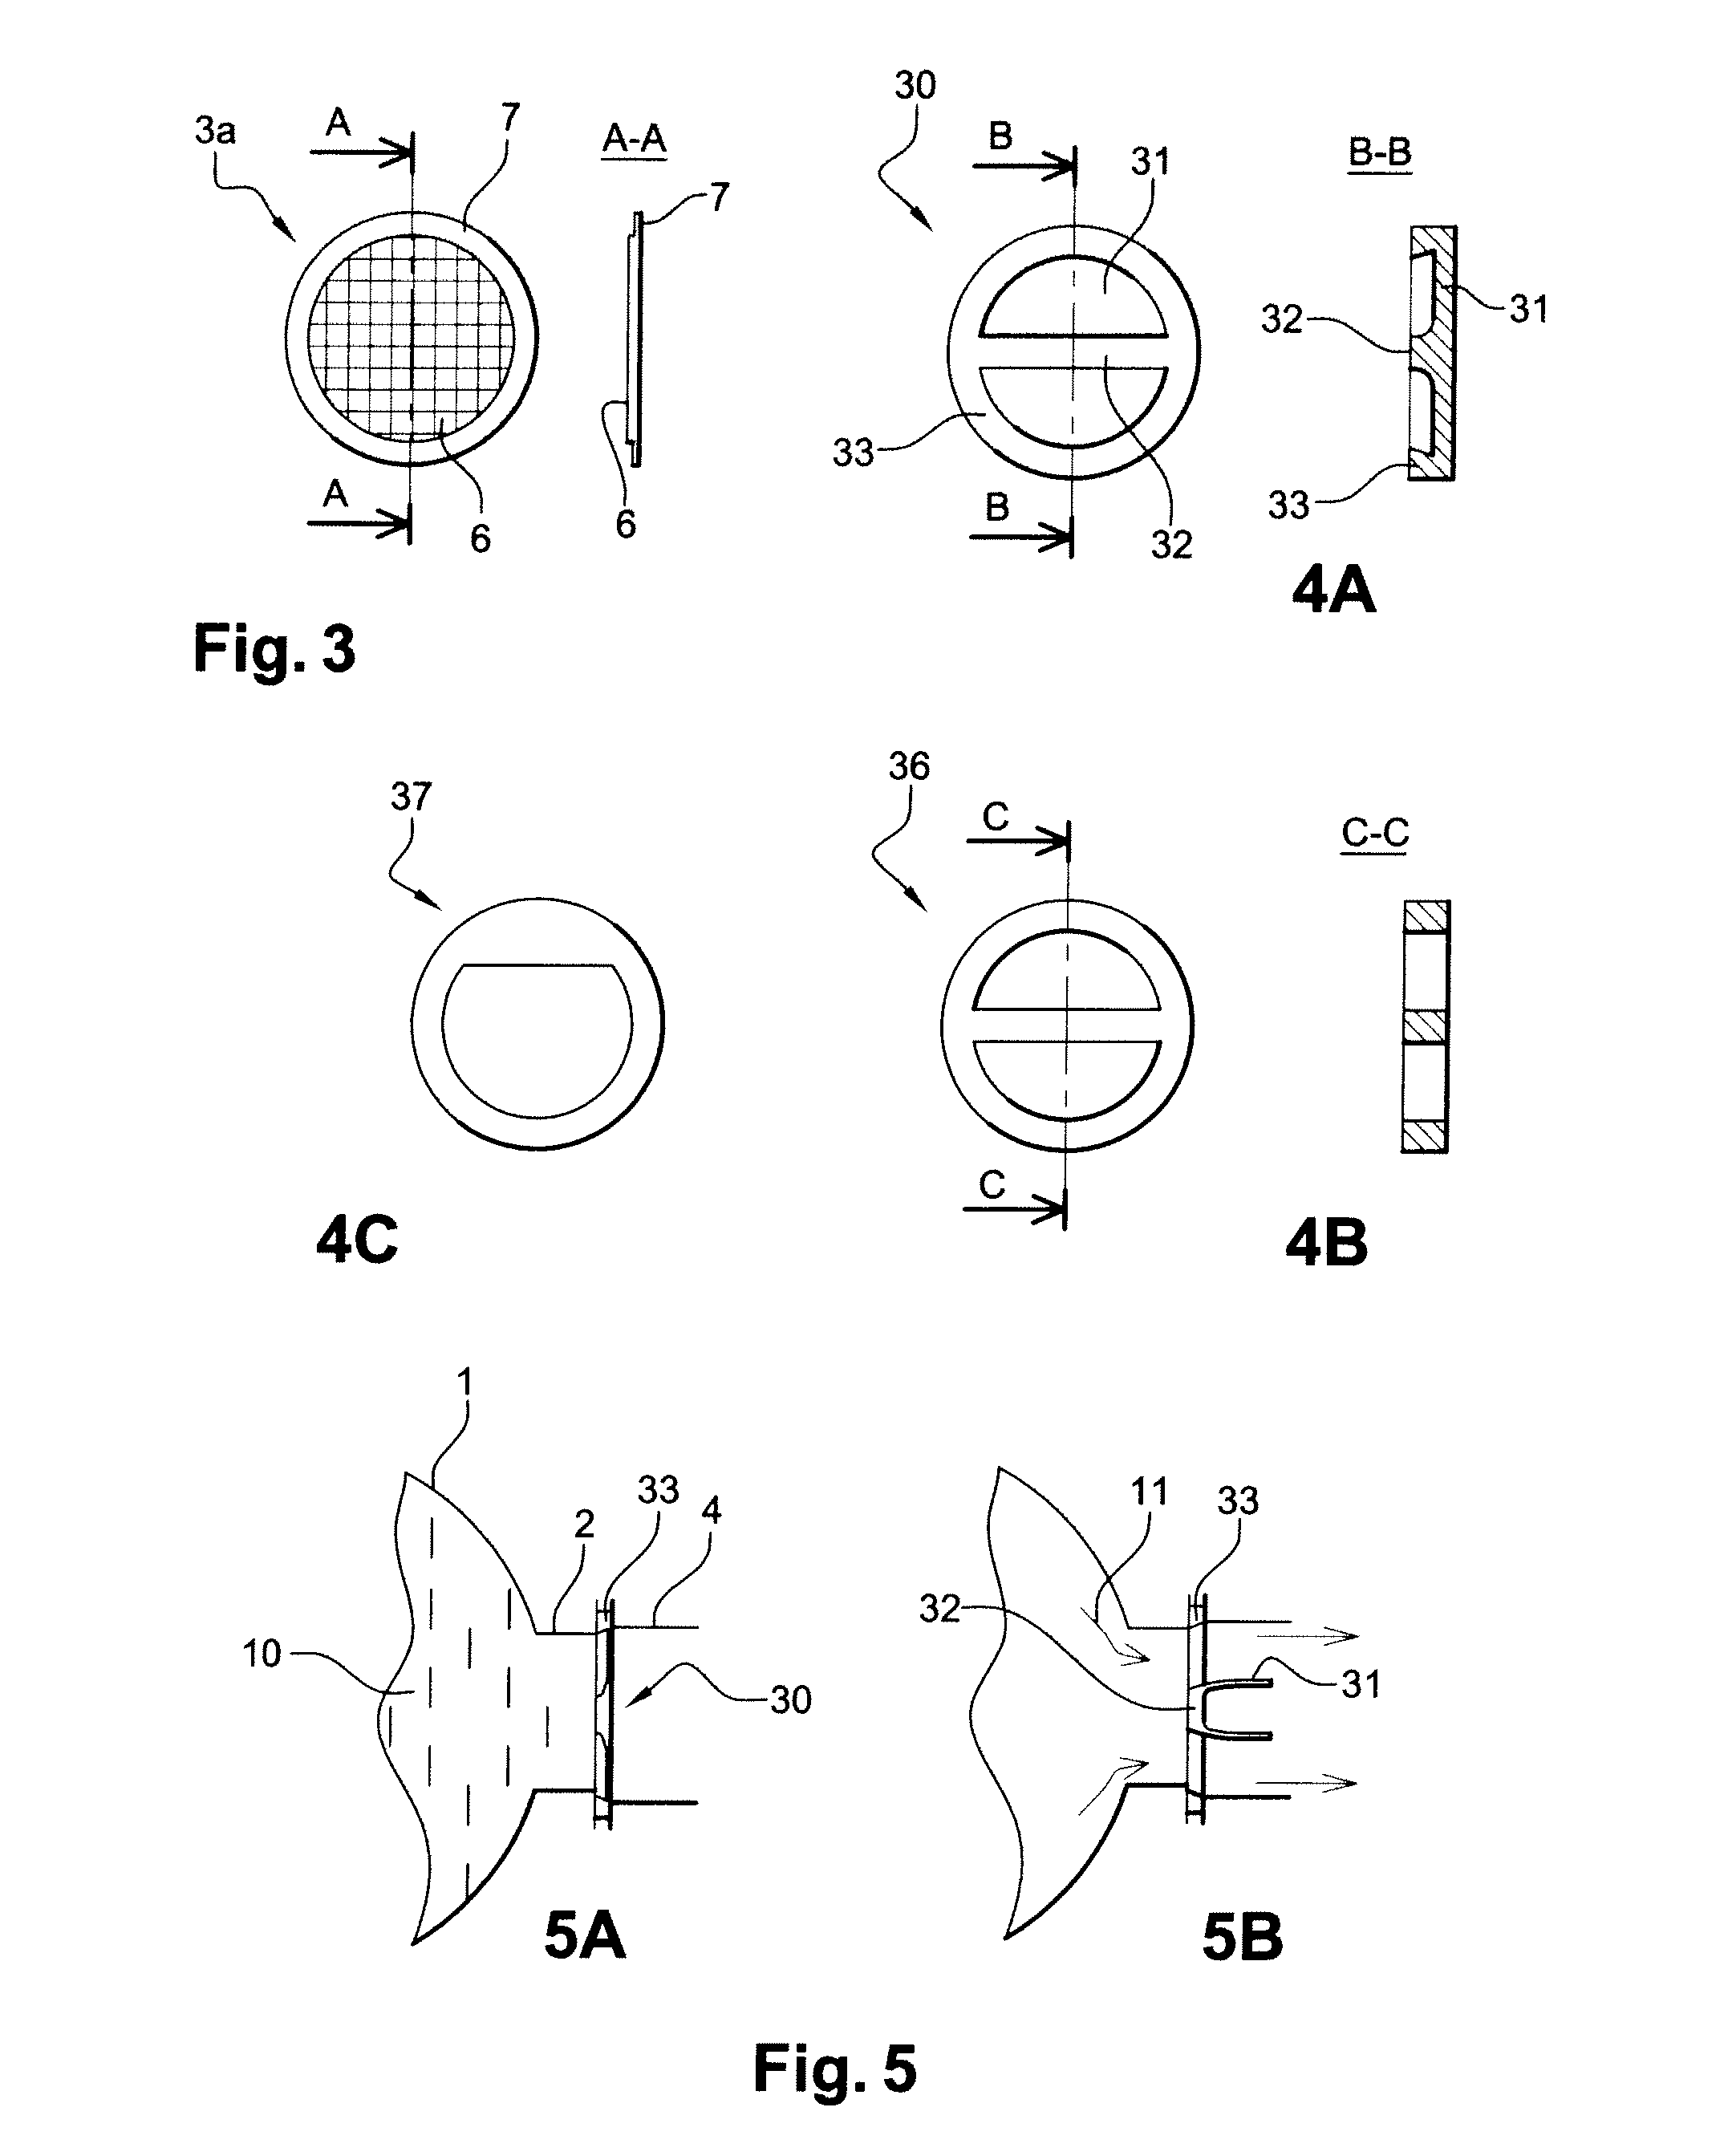 Fluid ejection device